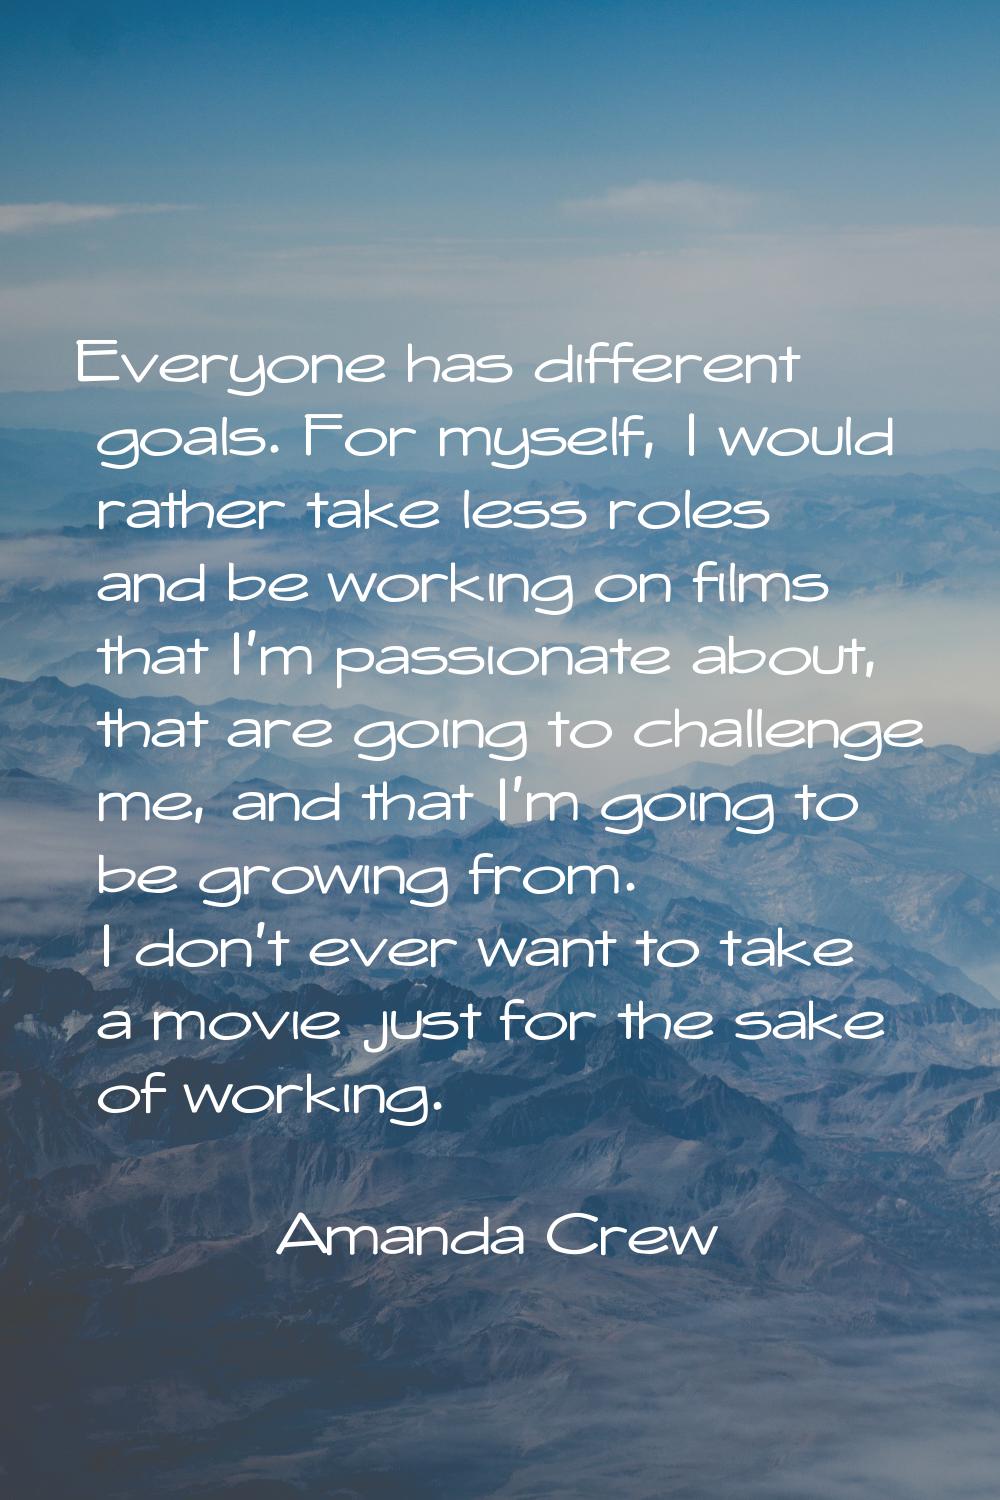 Everyone has different goals. For myself, I would rather take less roles and be working on films th